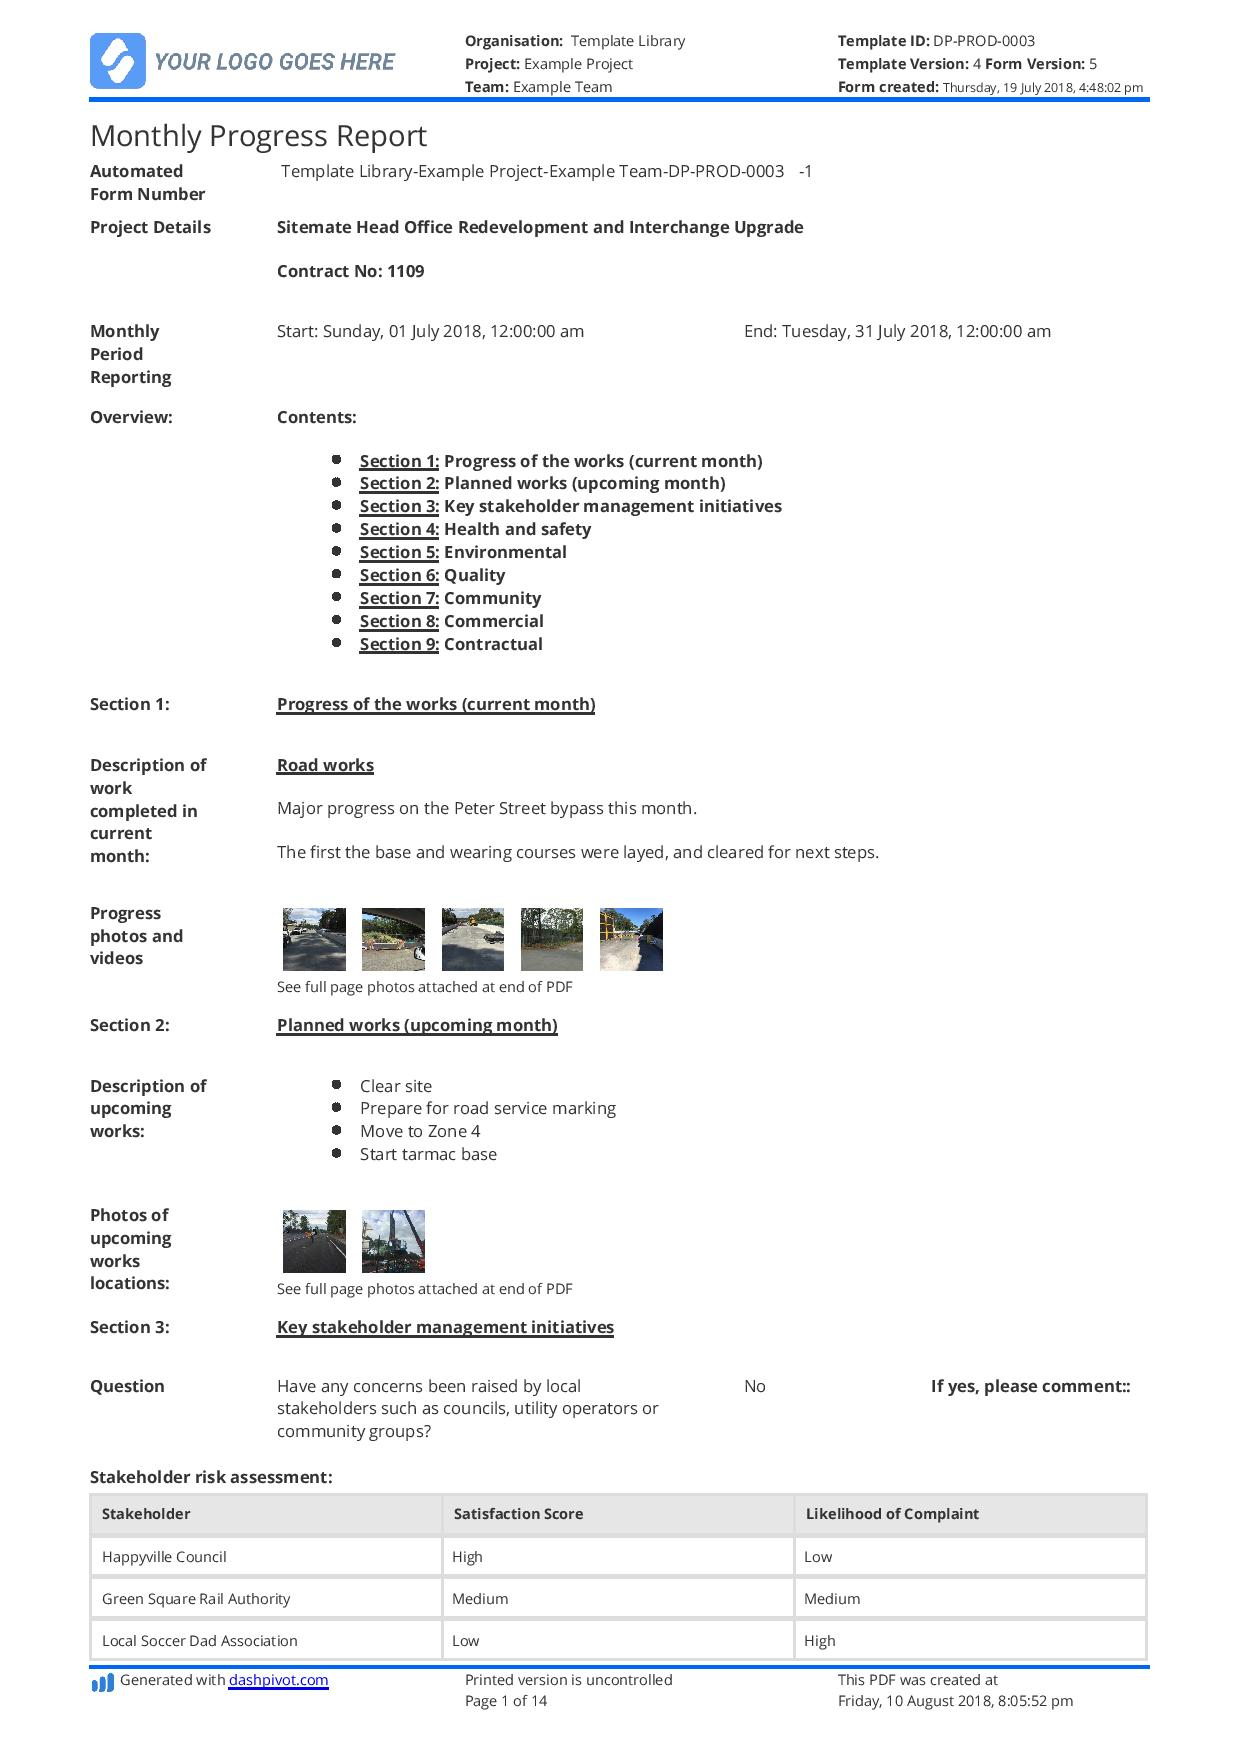 Monthly Construction Progress Report Template: Use This In Site Progress Report Template